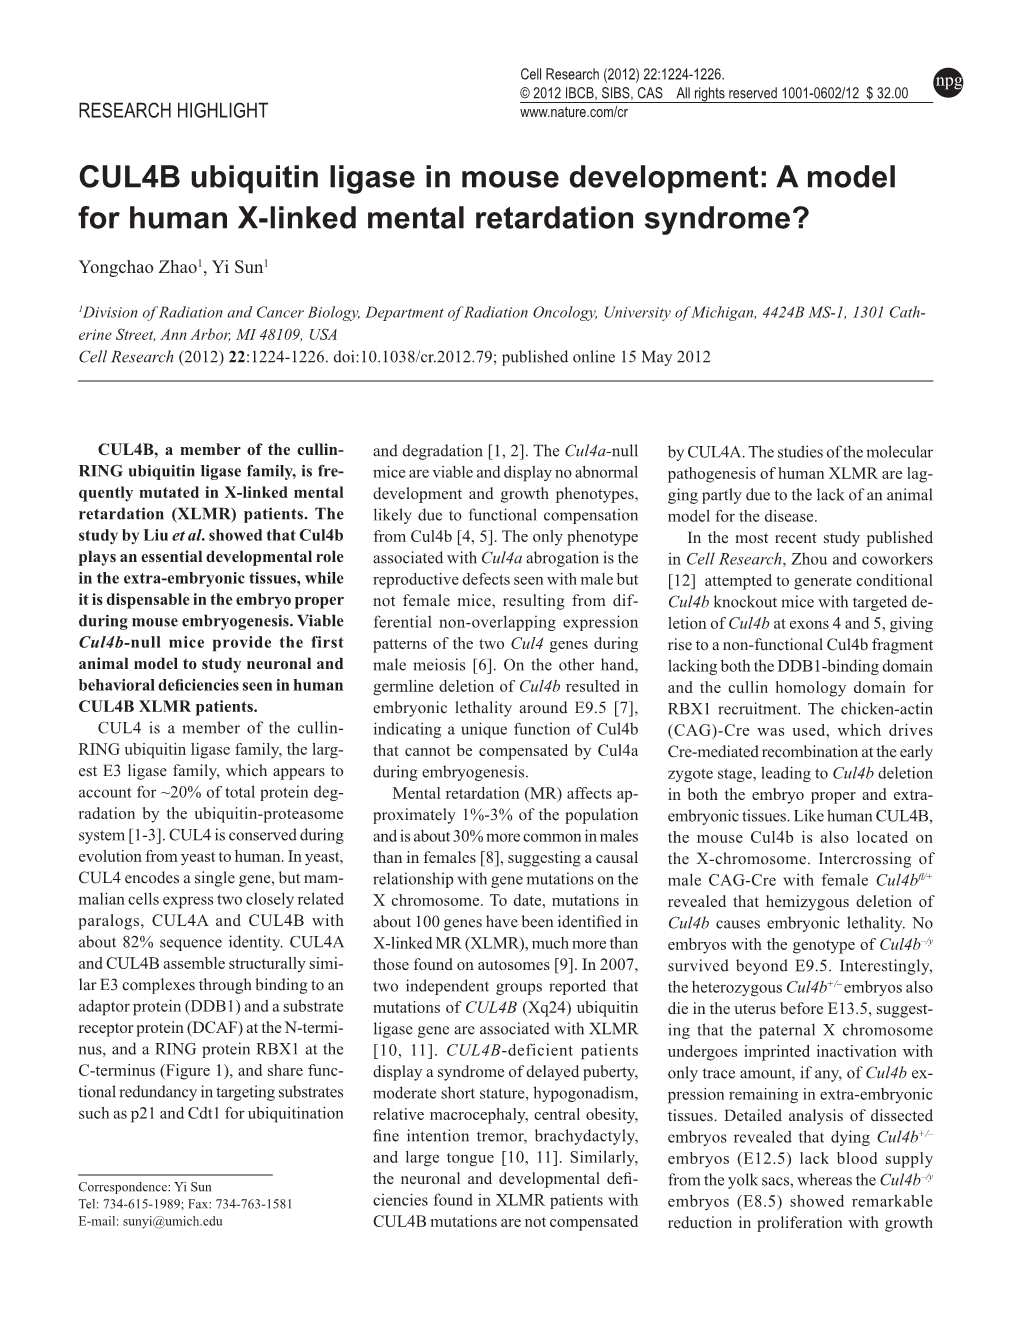 CUL4B Ubiquitin Ligase in Mouse Development: a Model for Human X-Linked Mental Retardation Syndrome?